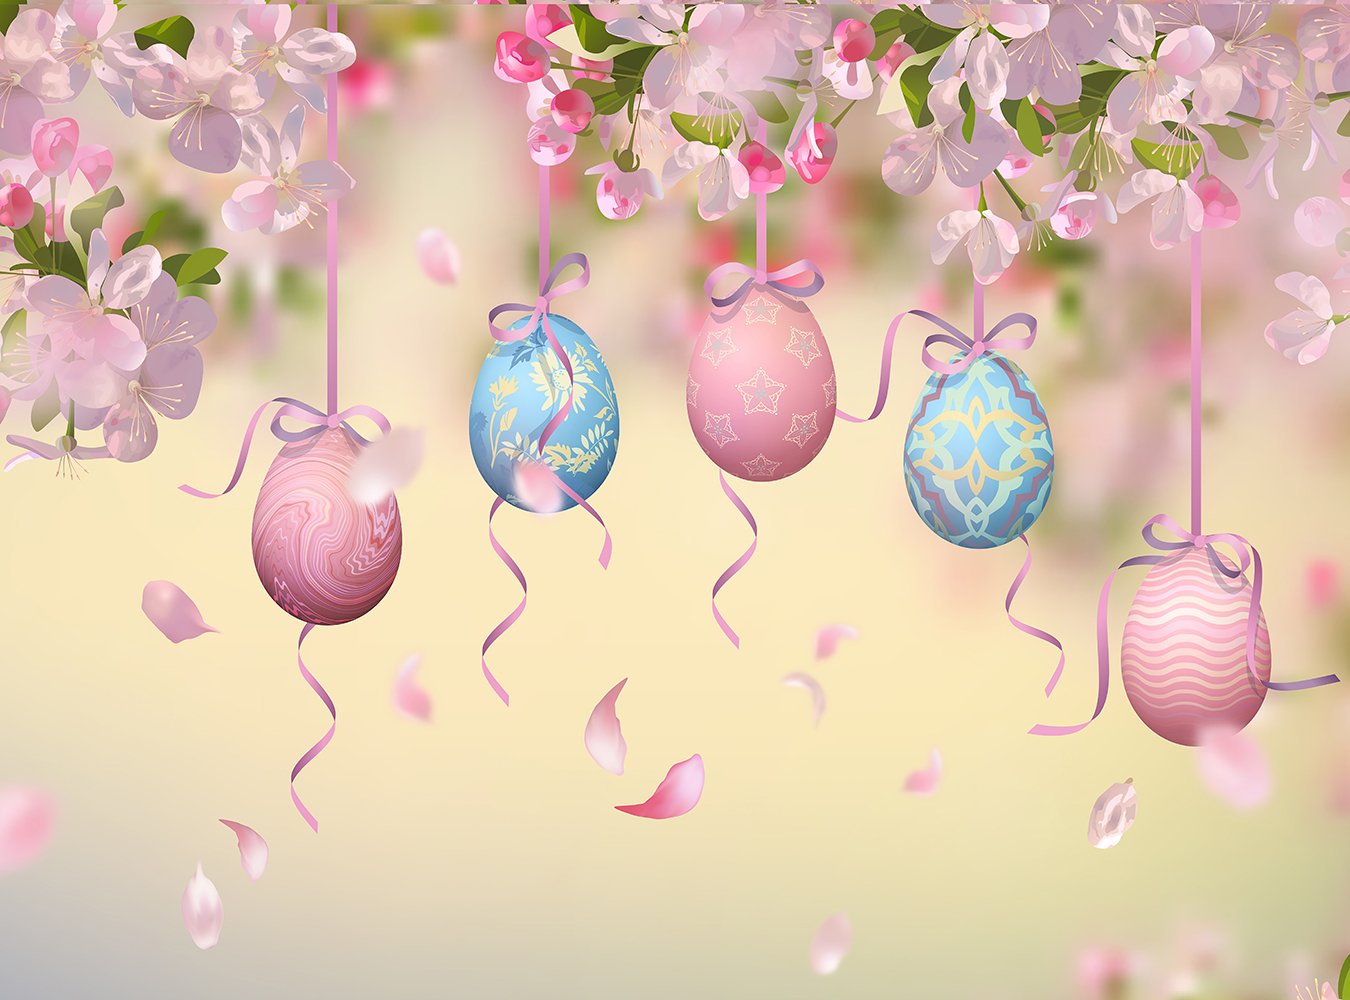 Festival Background Easter Falling Flowers Hanging Eggs Photography Backdrops IBD-20019 - iBACKDROP-backdrop photography, backdrops for photography, backdrops photography, Colored Eggs Backdrops, Colorful Eggs background, Easter Backdrop, Easter Backdrops, Easter Photography Backdrops, Falling Flowers, Festival Background, For Photography, Photography Background